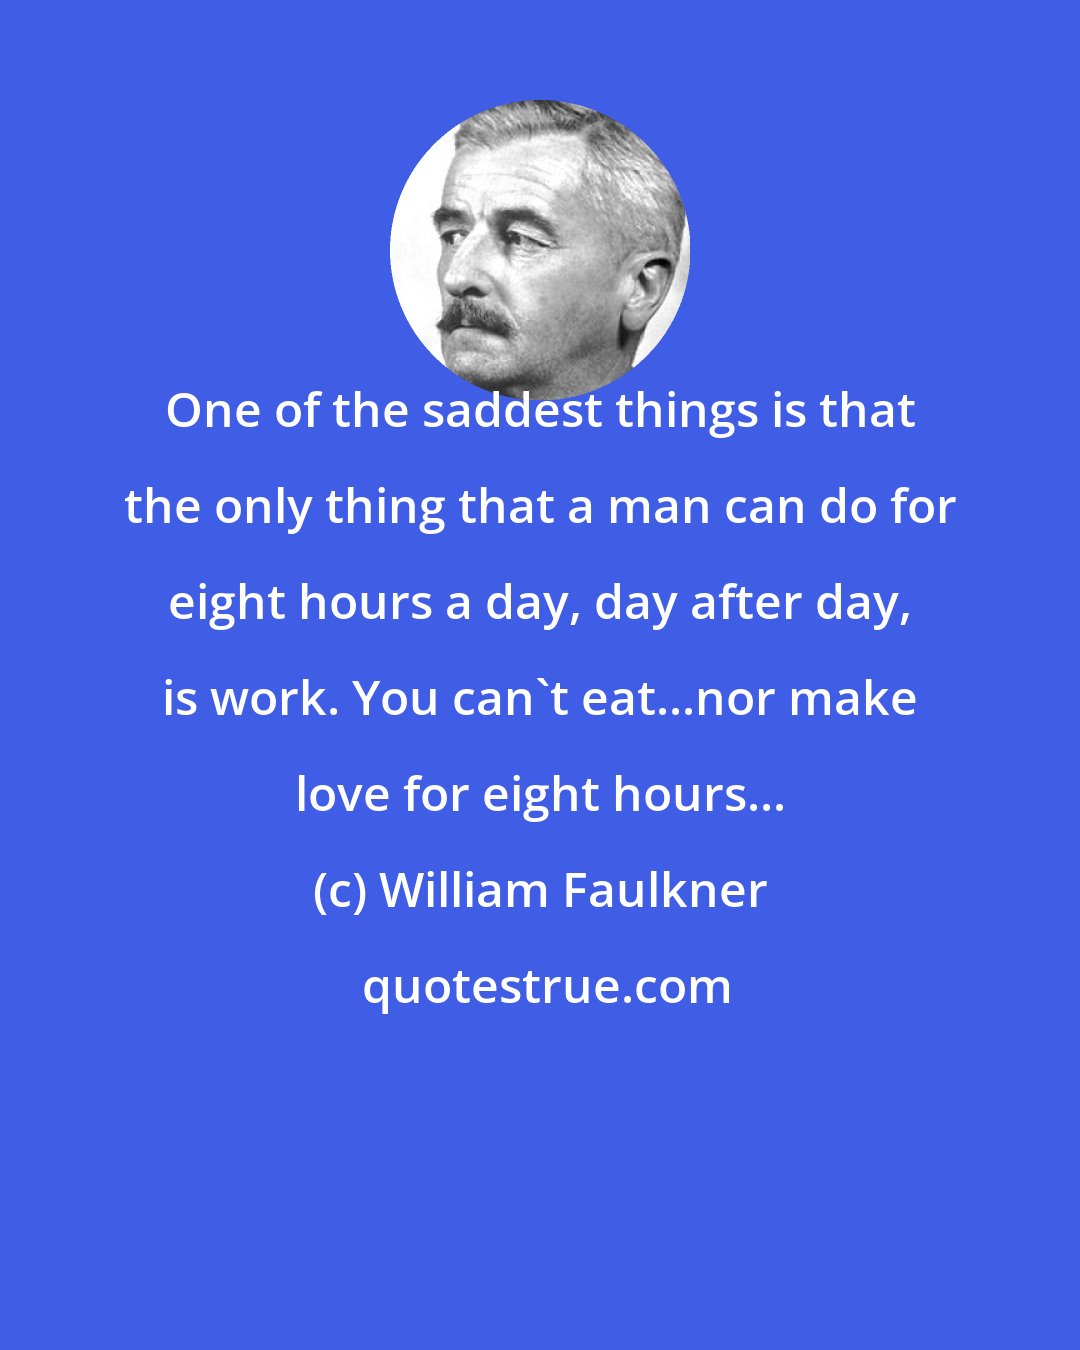 William Faulkner: One of the saddest things is that the only thing that a man can do for eight hours a day, day after day, is work. You can't eat...nor make love for eight hours...